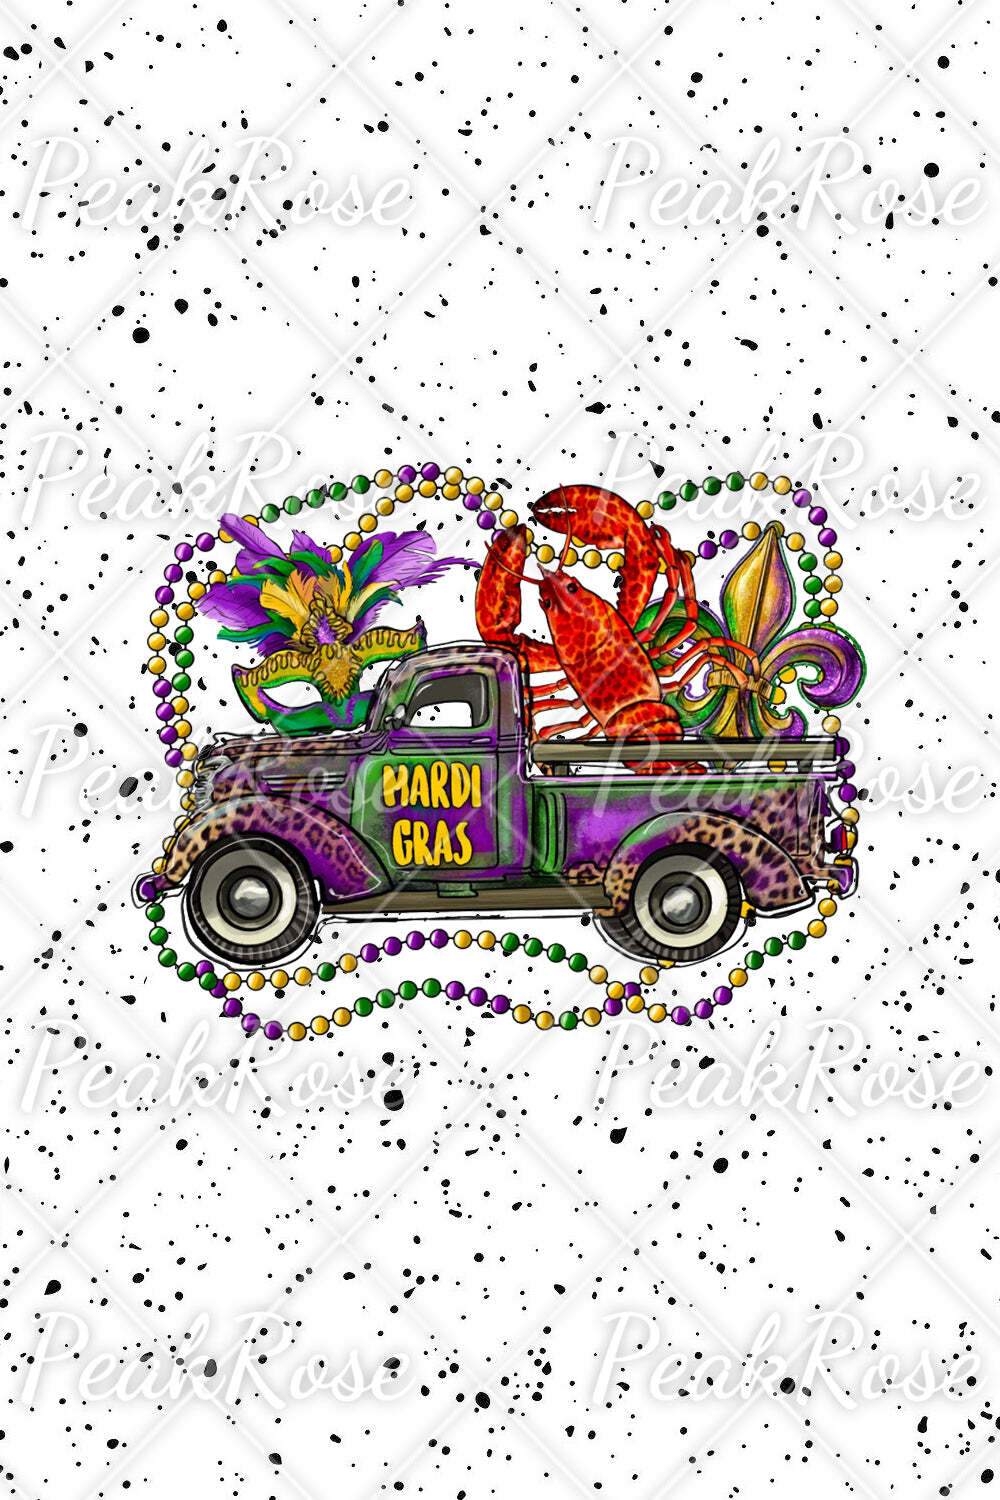 [CLEARANCE SALE]Mardi Gras Truck With Mask Fleur De Lis And Crawfish Western Leopard Print V-Neck Long Sleeve Tee